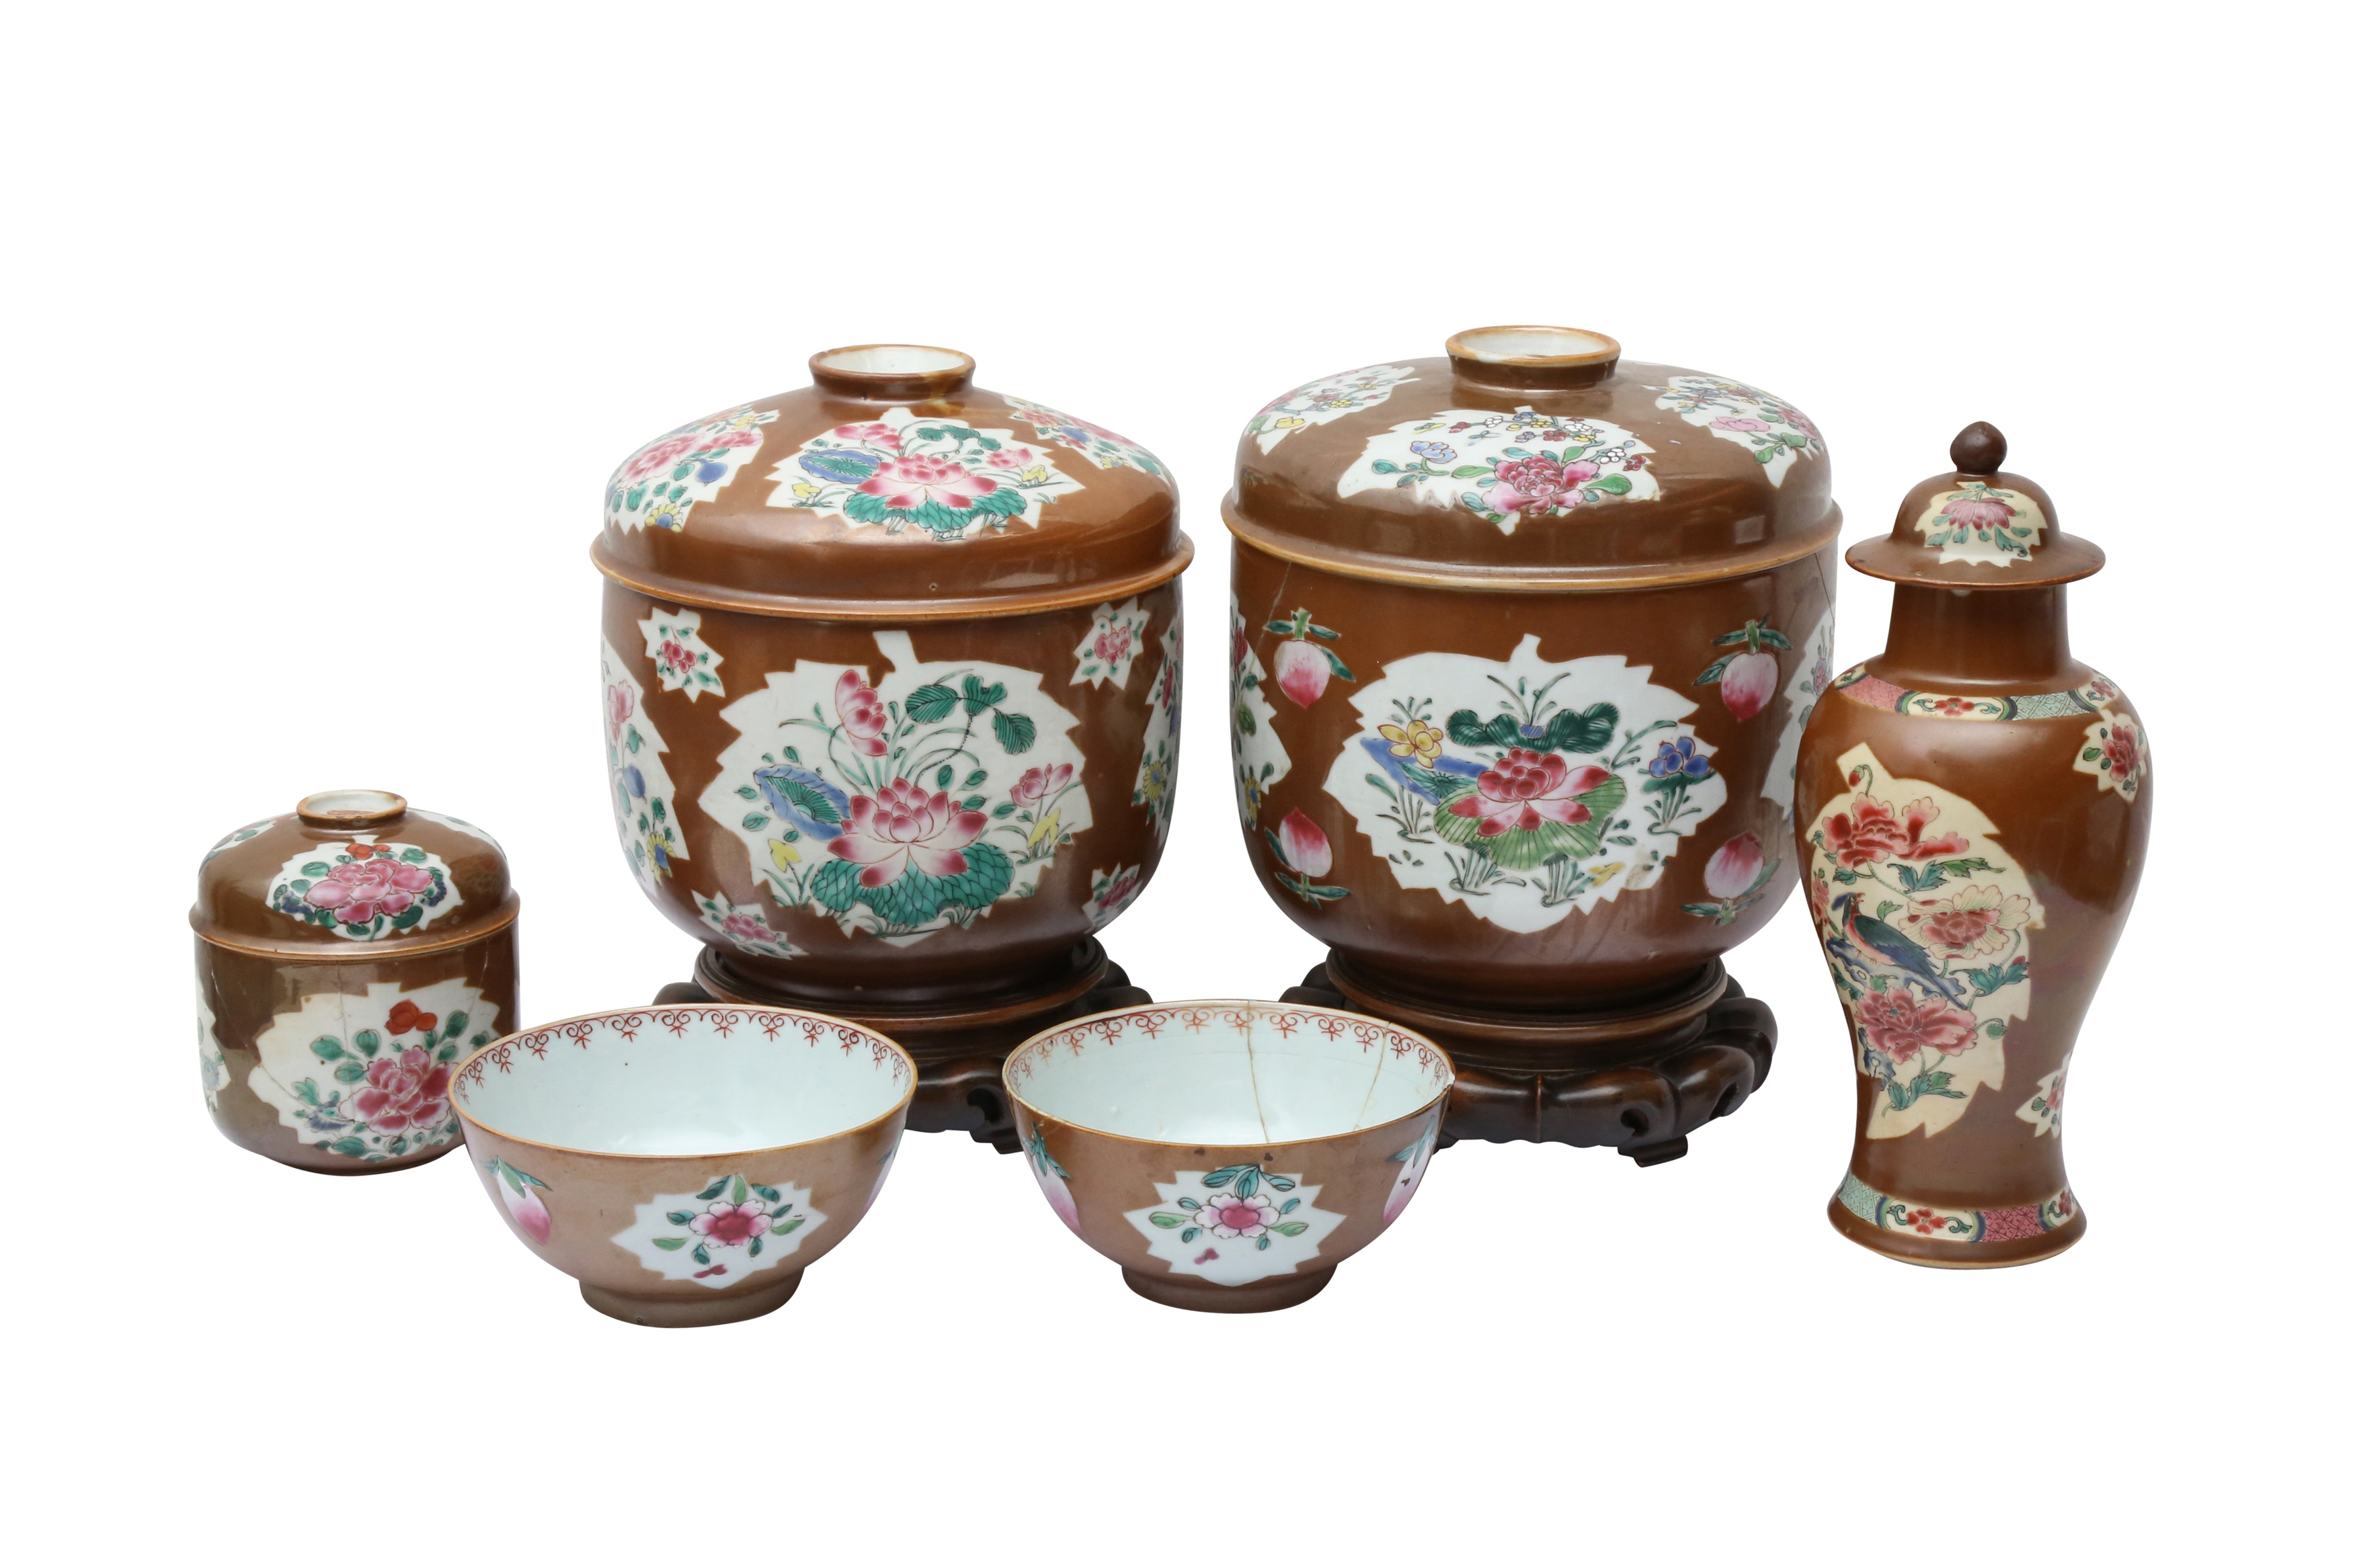 A GROUP OF CHINESE FAMILLE-ROSE 'BATAVIAN' WARES 清十八世紀 醬釉開光粉彩花卉紋瓷器一組